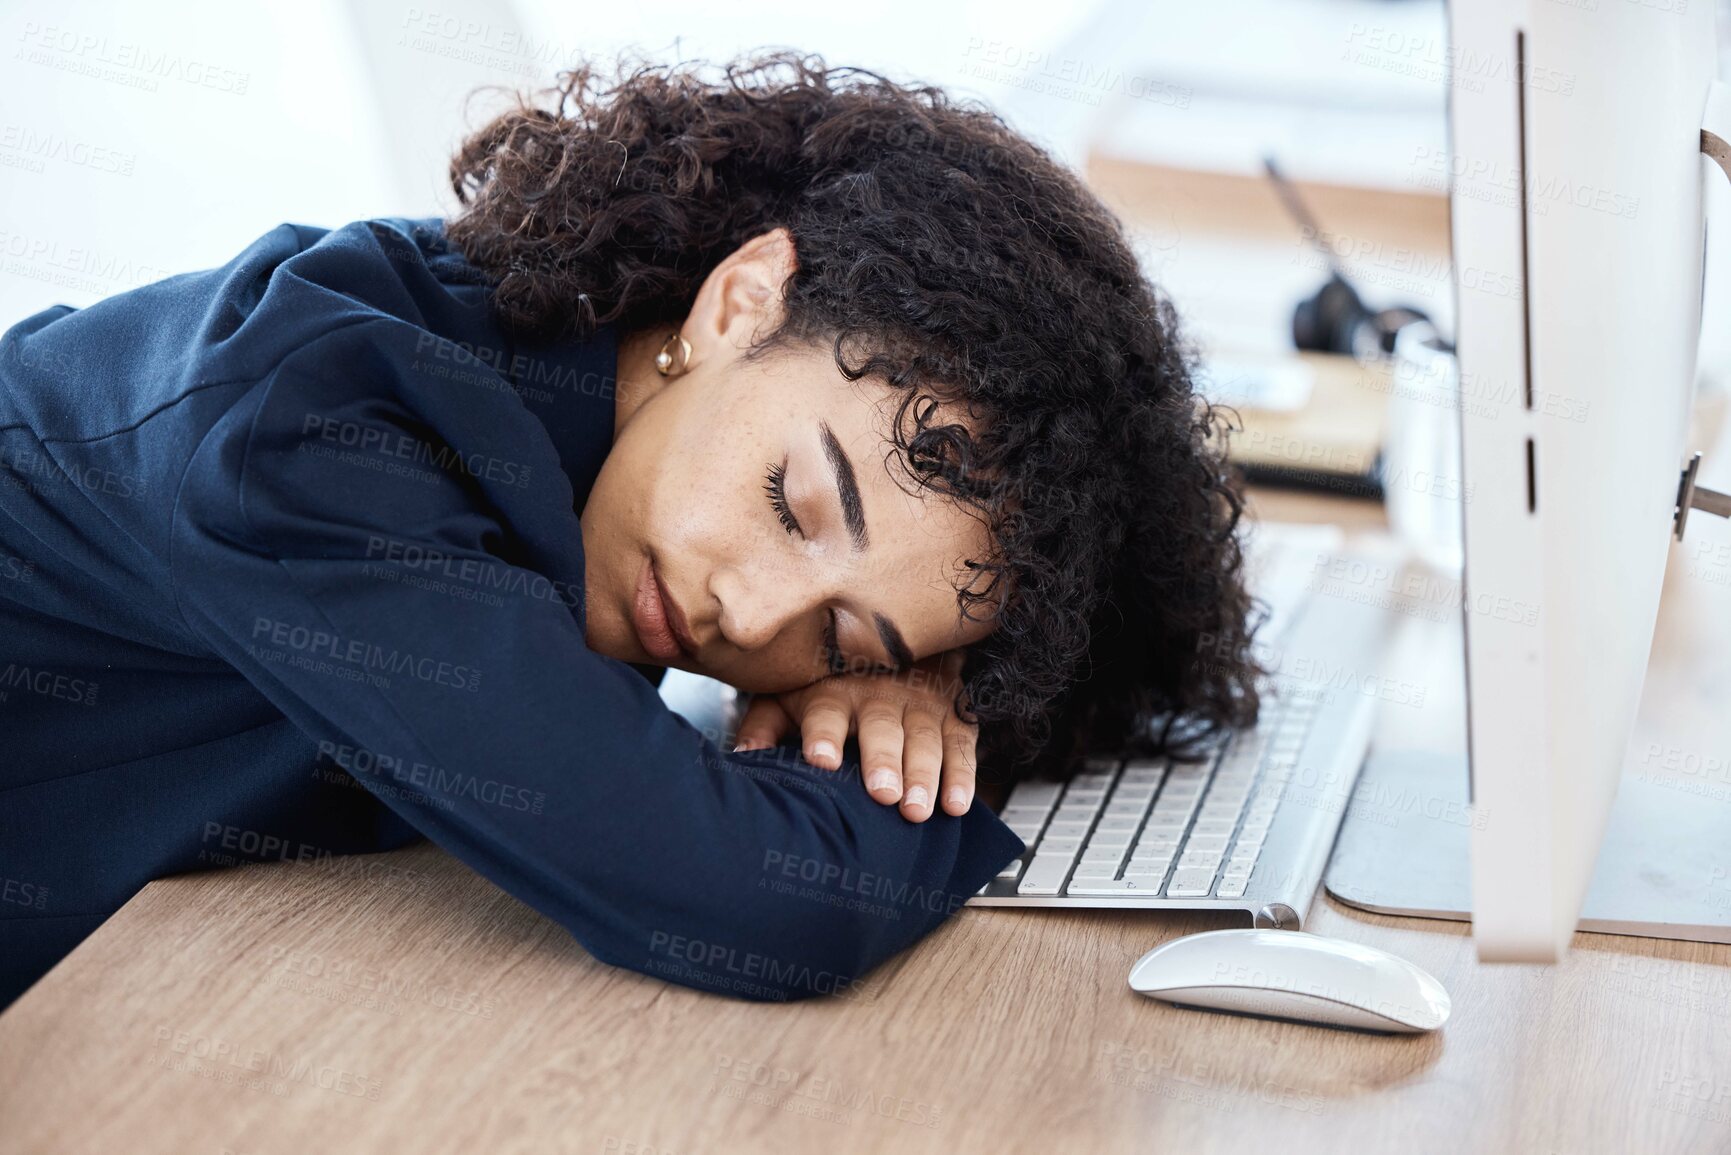 Buy stock photo Sleeping, office and business woman burnout from finance portfolio work, stock market database or investment budget. Fatigue, forex account manager or trader tired from NFT, bitcoin or crypto trading